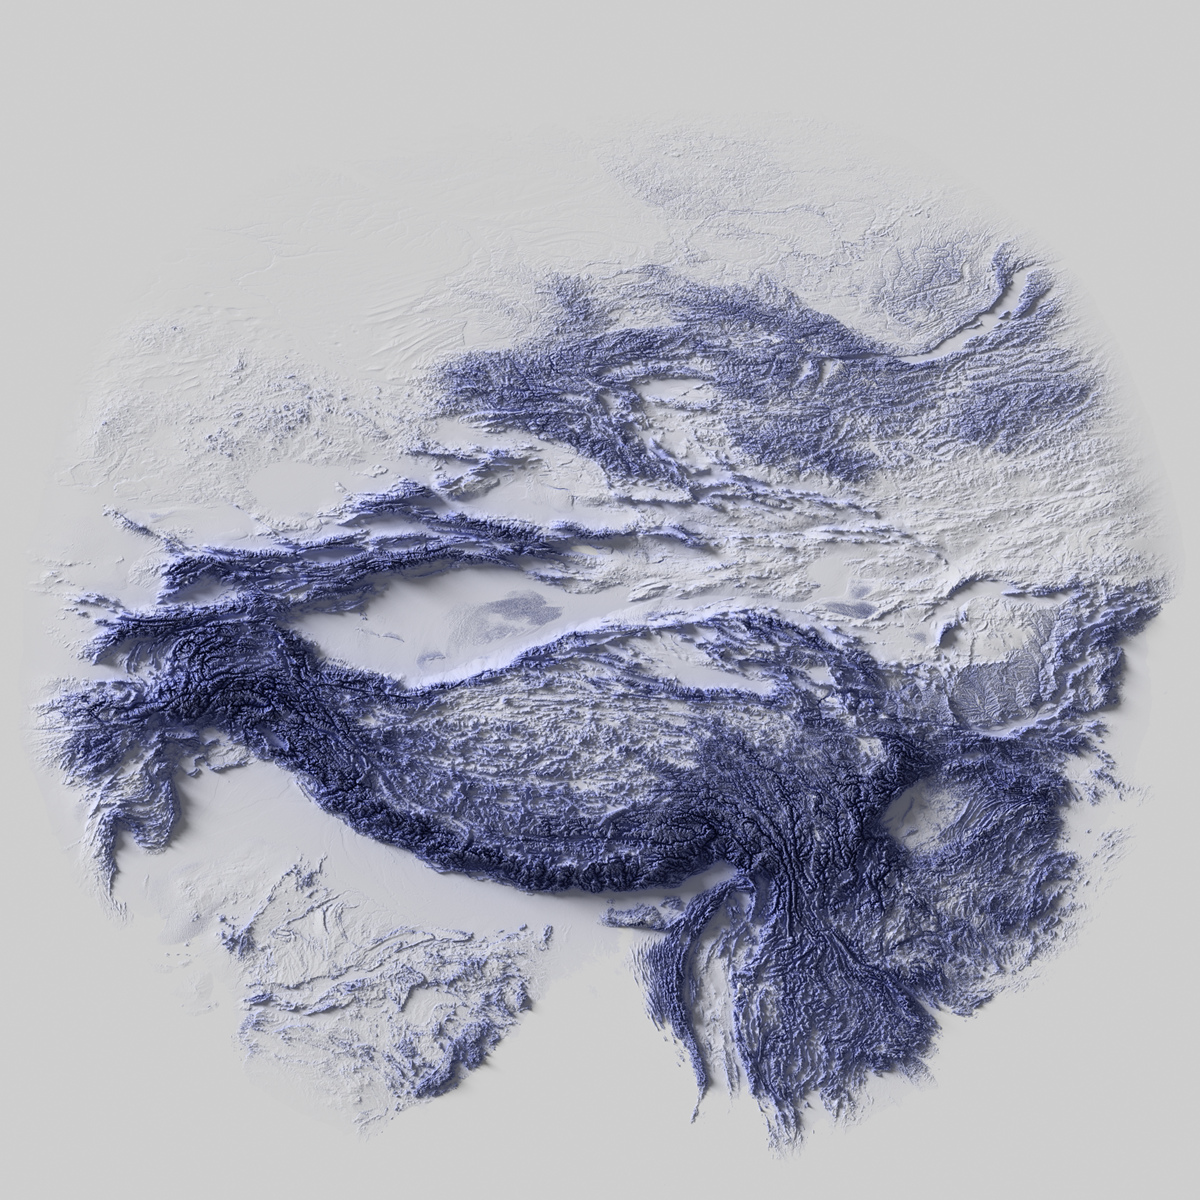 Preview of terrain heightmap render of the regions around the Himalayas using occlusion shading mapping